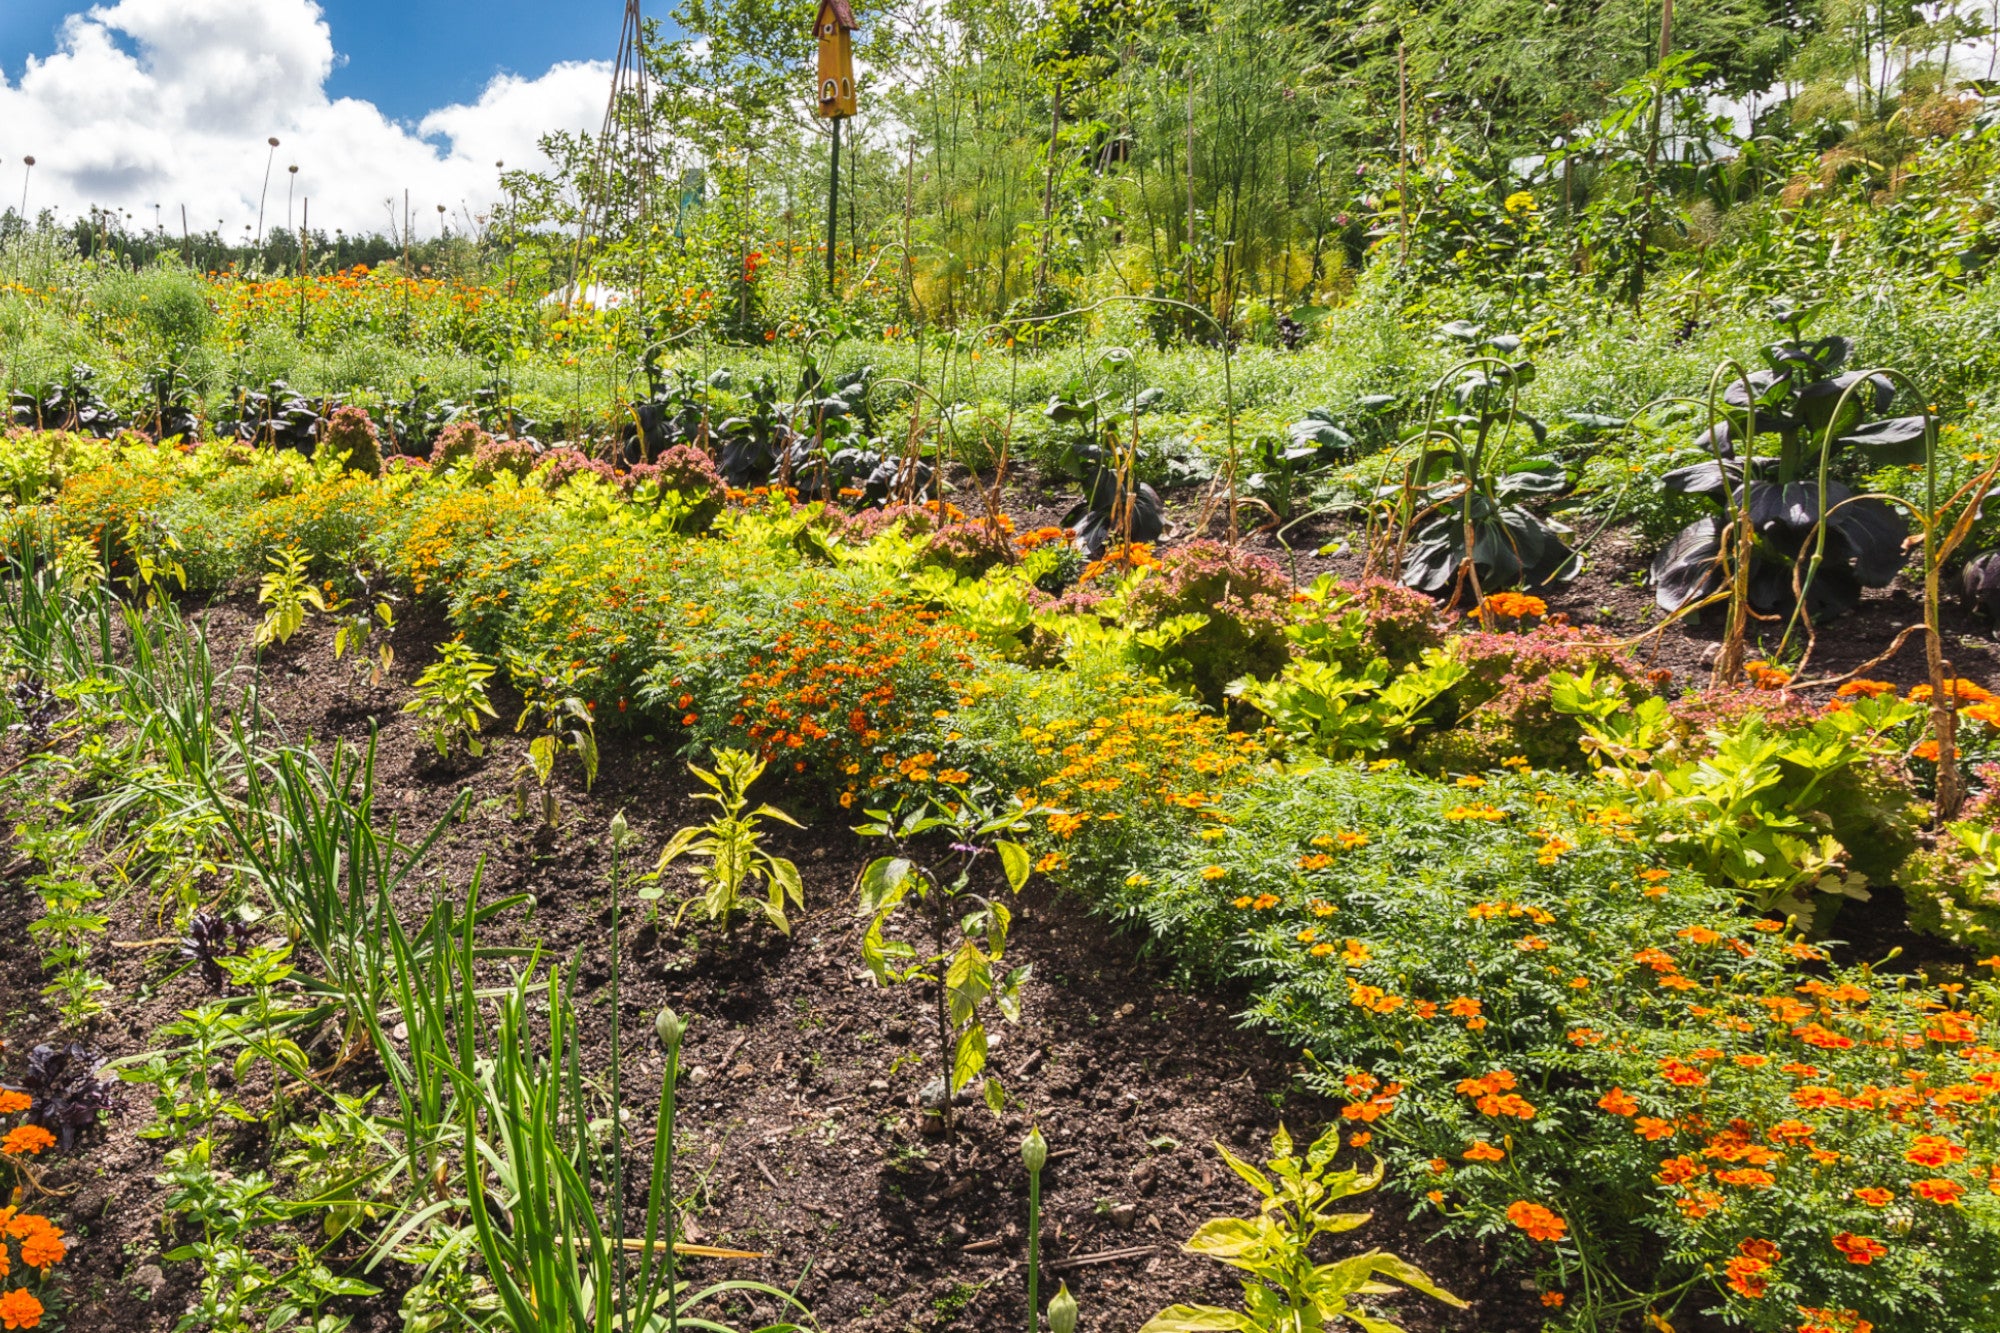 A guide to growing your own vegetable patch